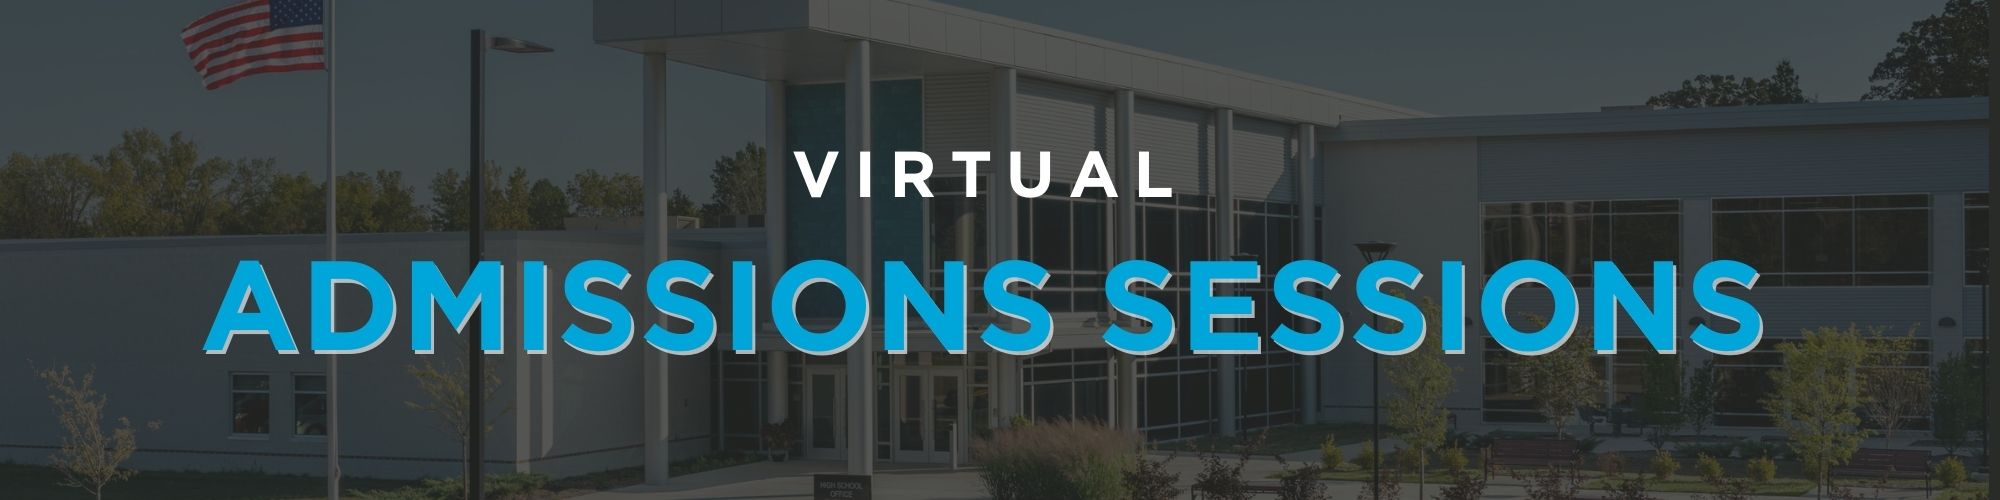 Virtual Admissions Sessions